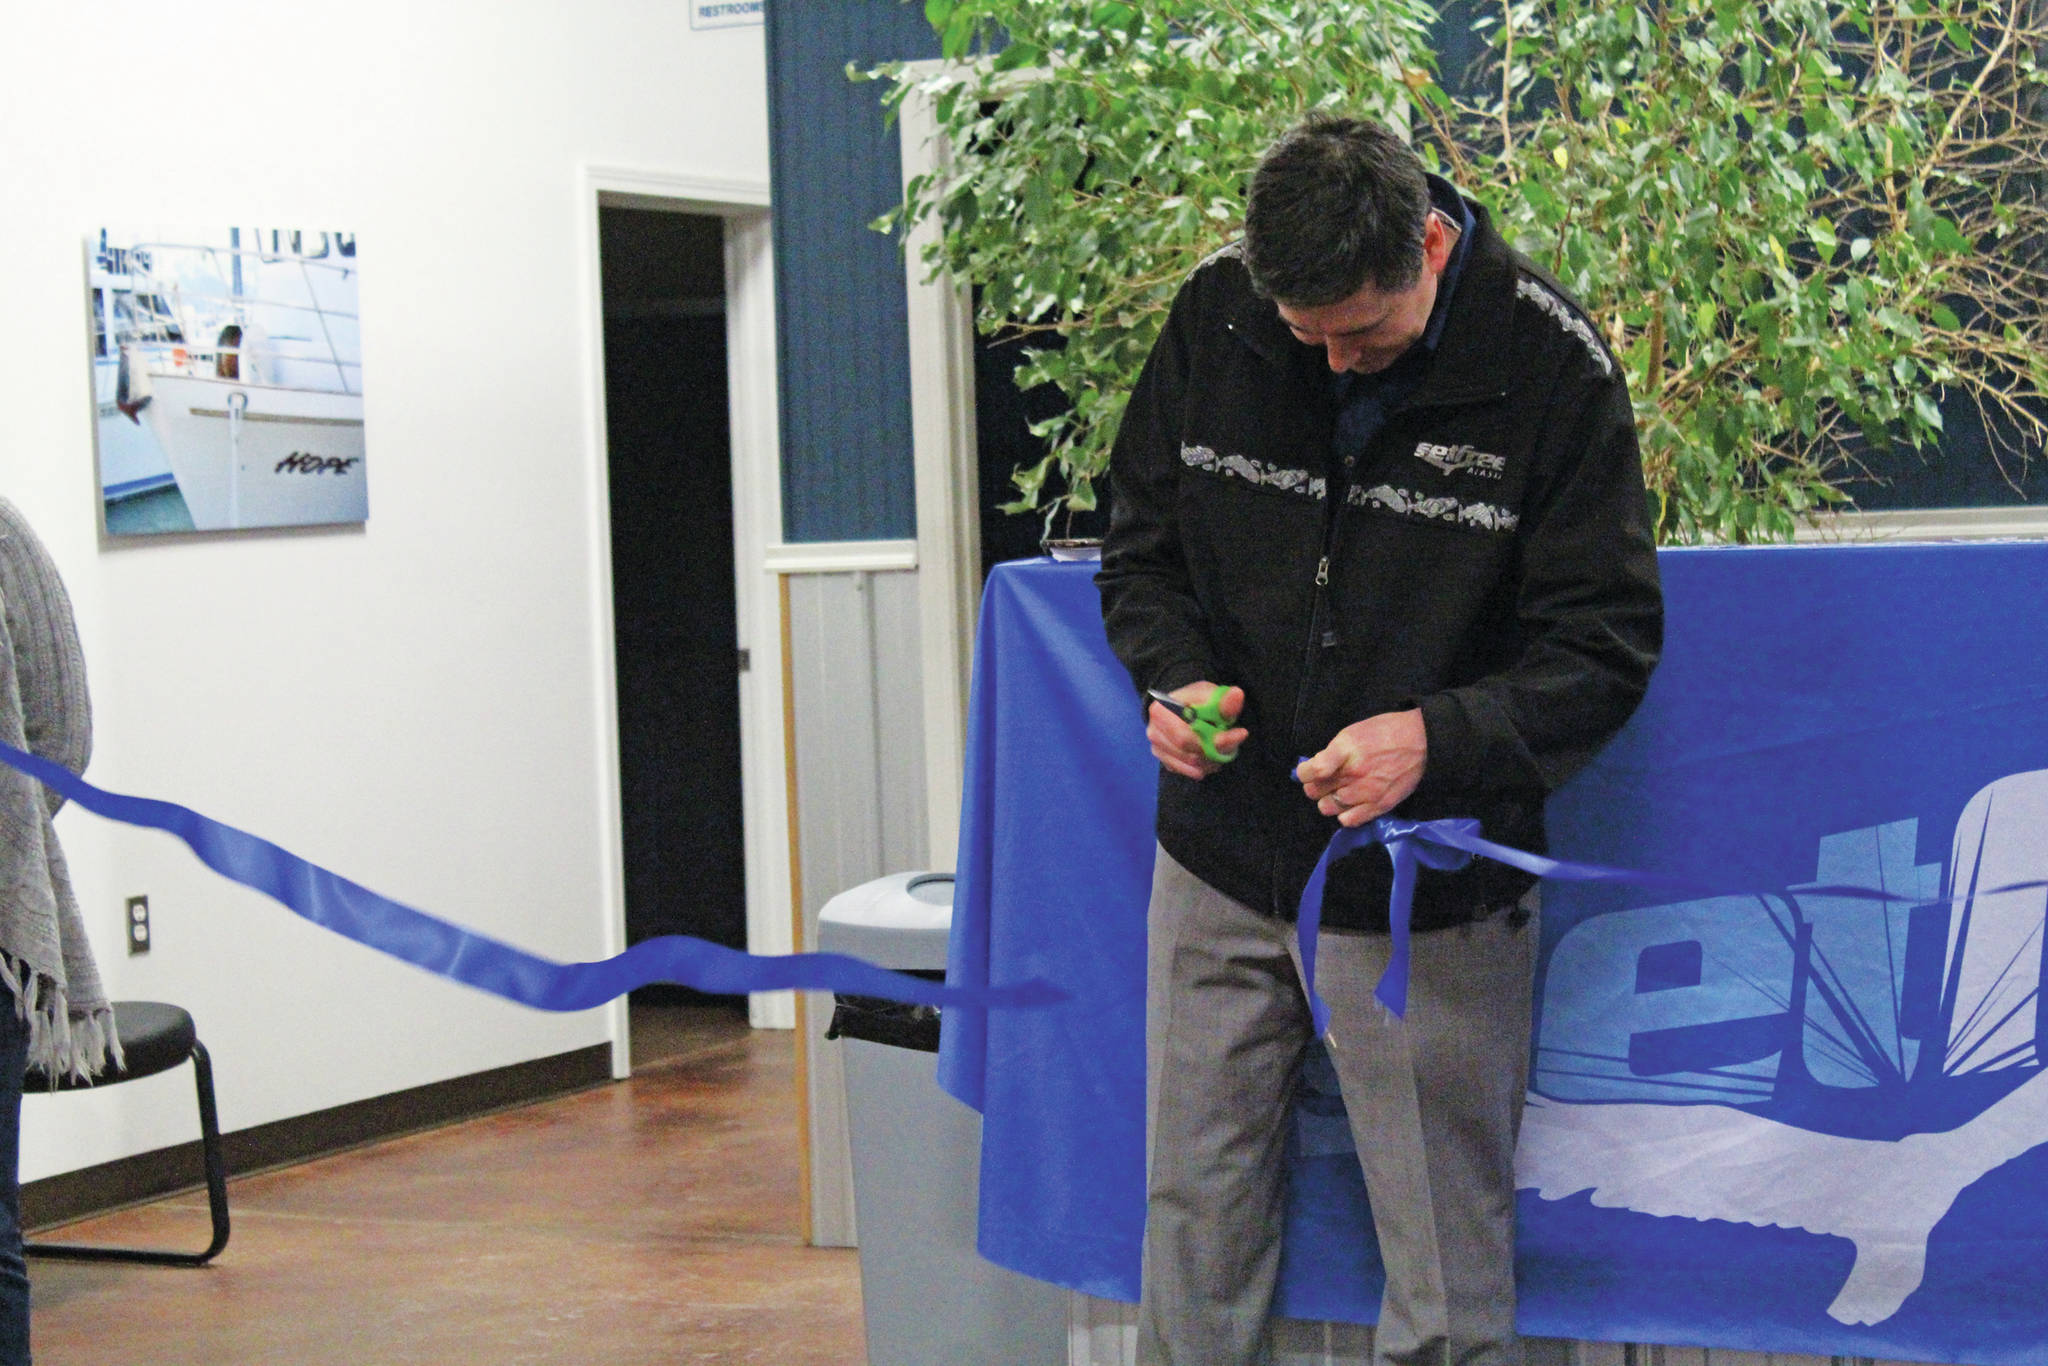 Josh Garvey, a member of Set Free Alaska’s board of directors, cuts the ribbon celebrating the opening of the faith-based addiction treatment nonprofit’s outpatient services building on Ocean Drive on Monday, Jan. 13, 2020 in Homer, Alaska. (Photo by Megan Pacer/Homer News)